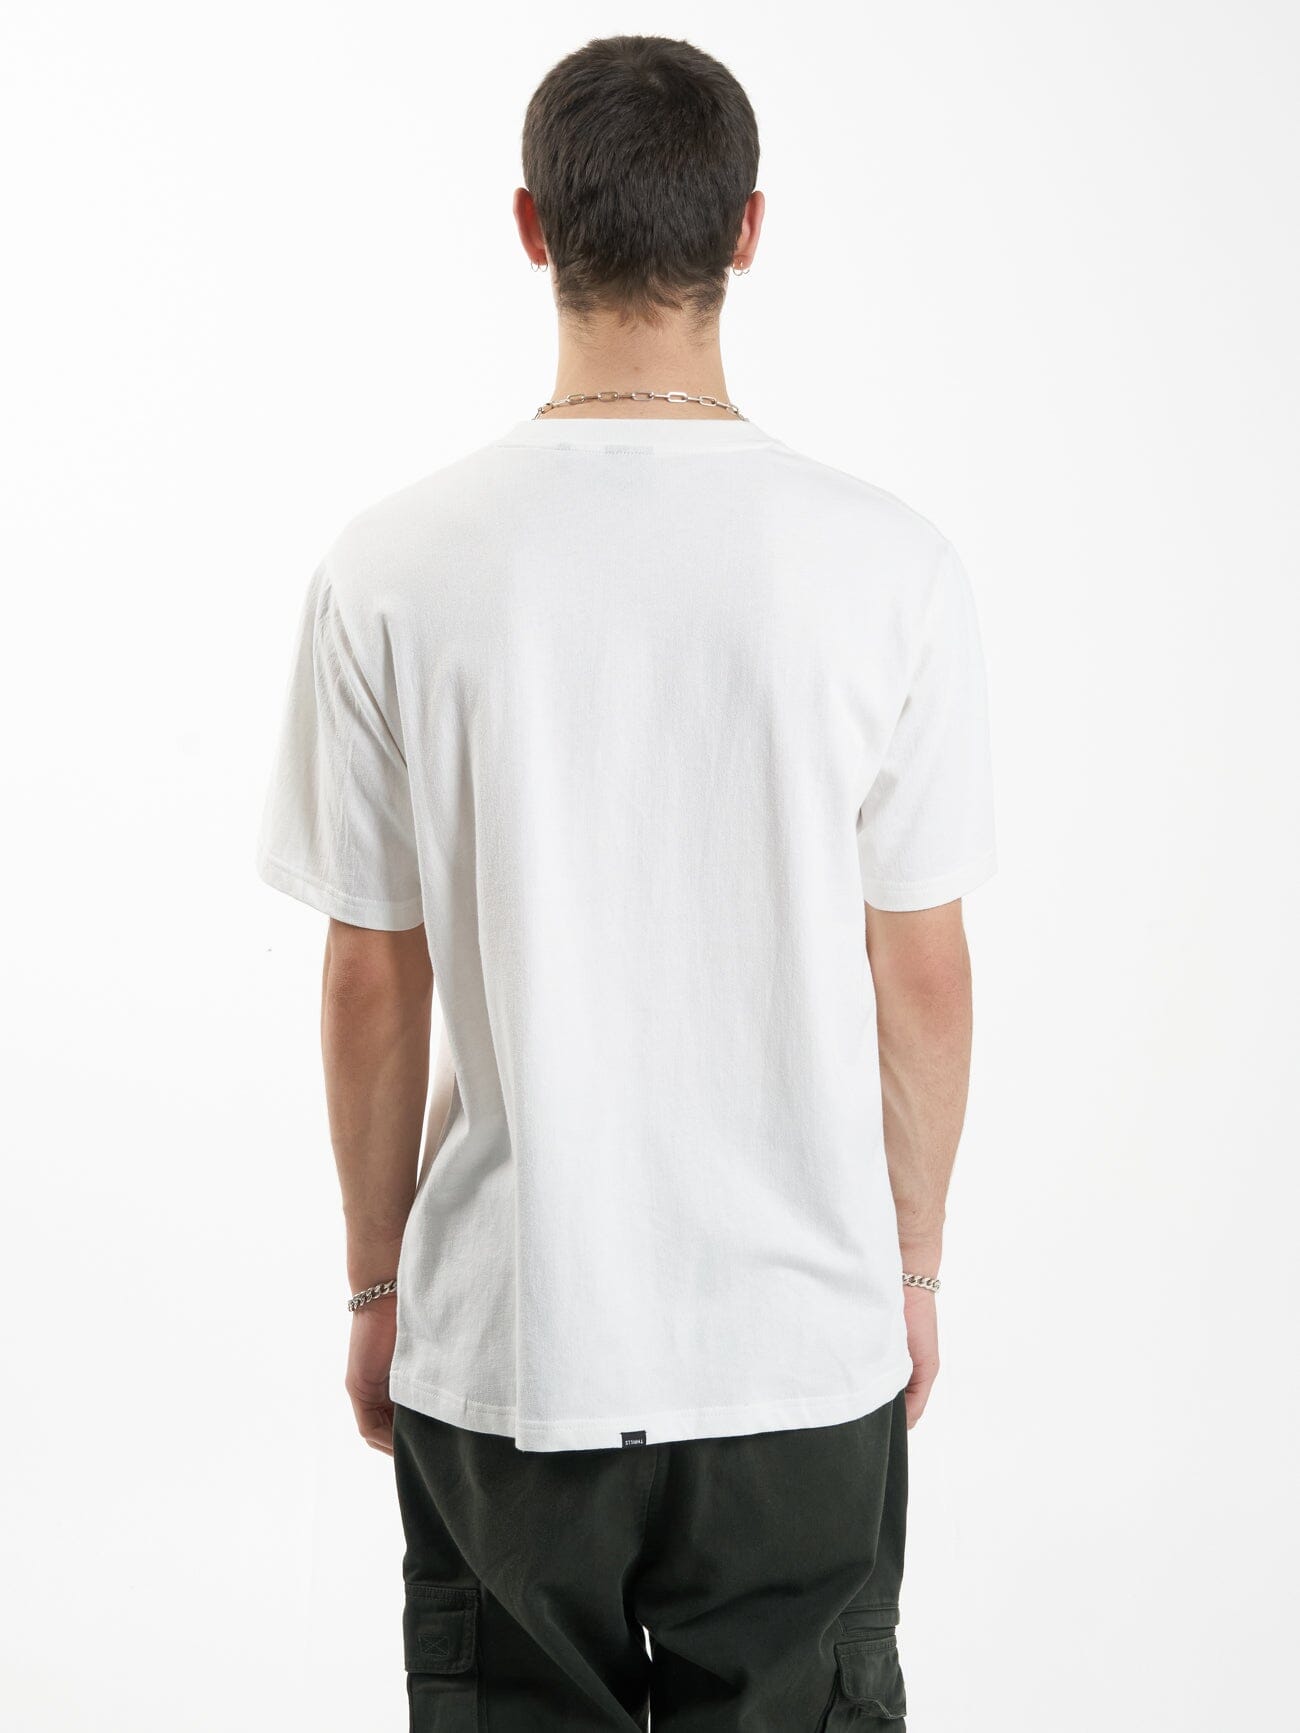 Spectral Merch Fit Tee - Dirty White